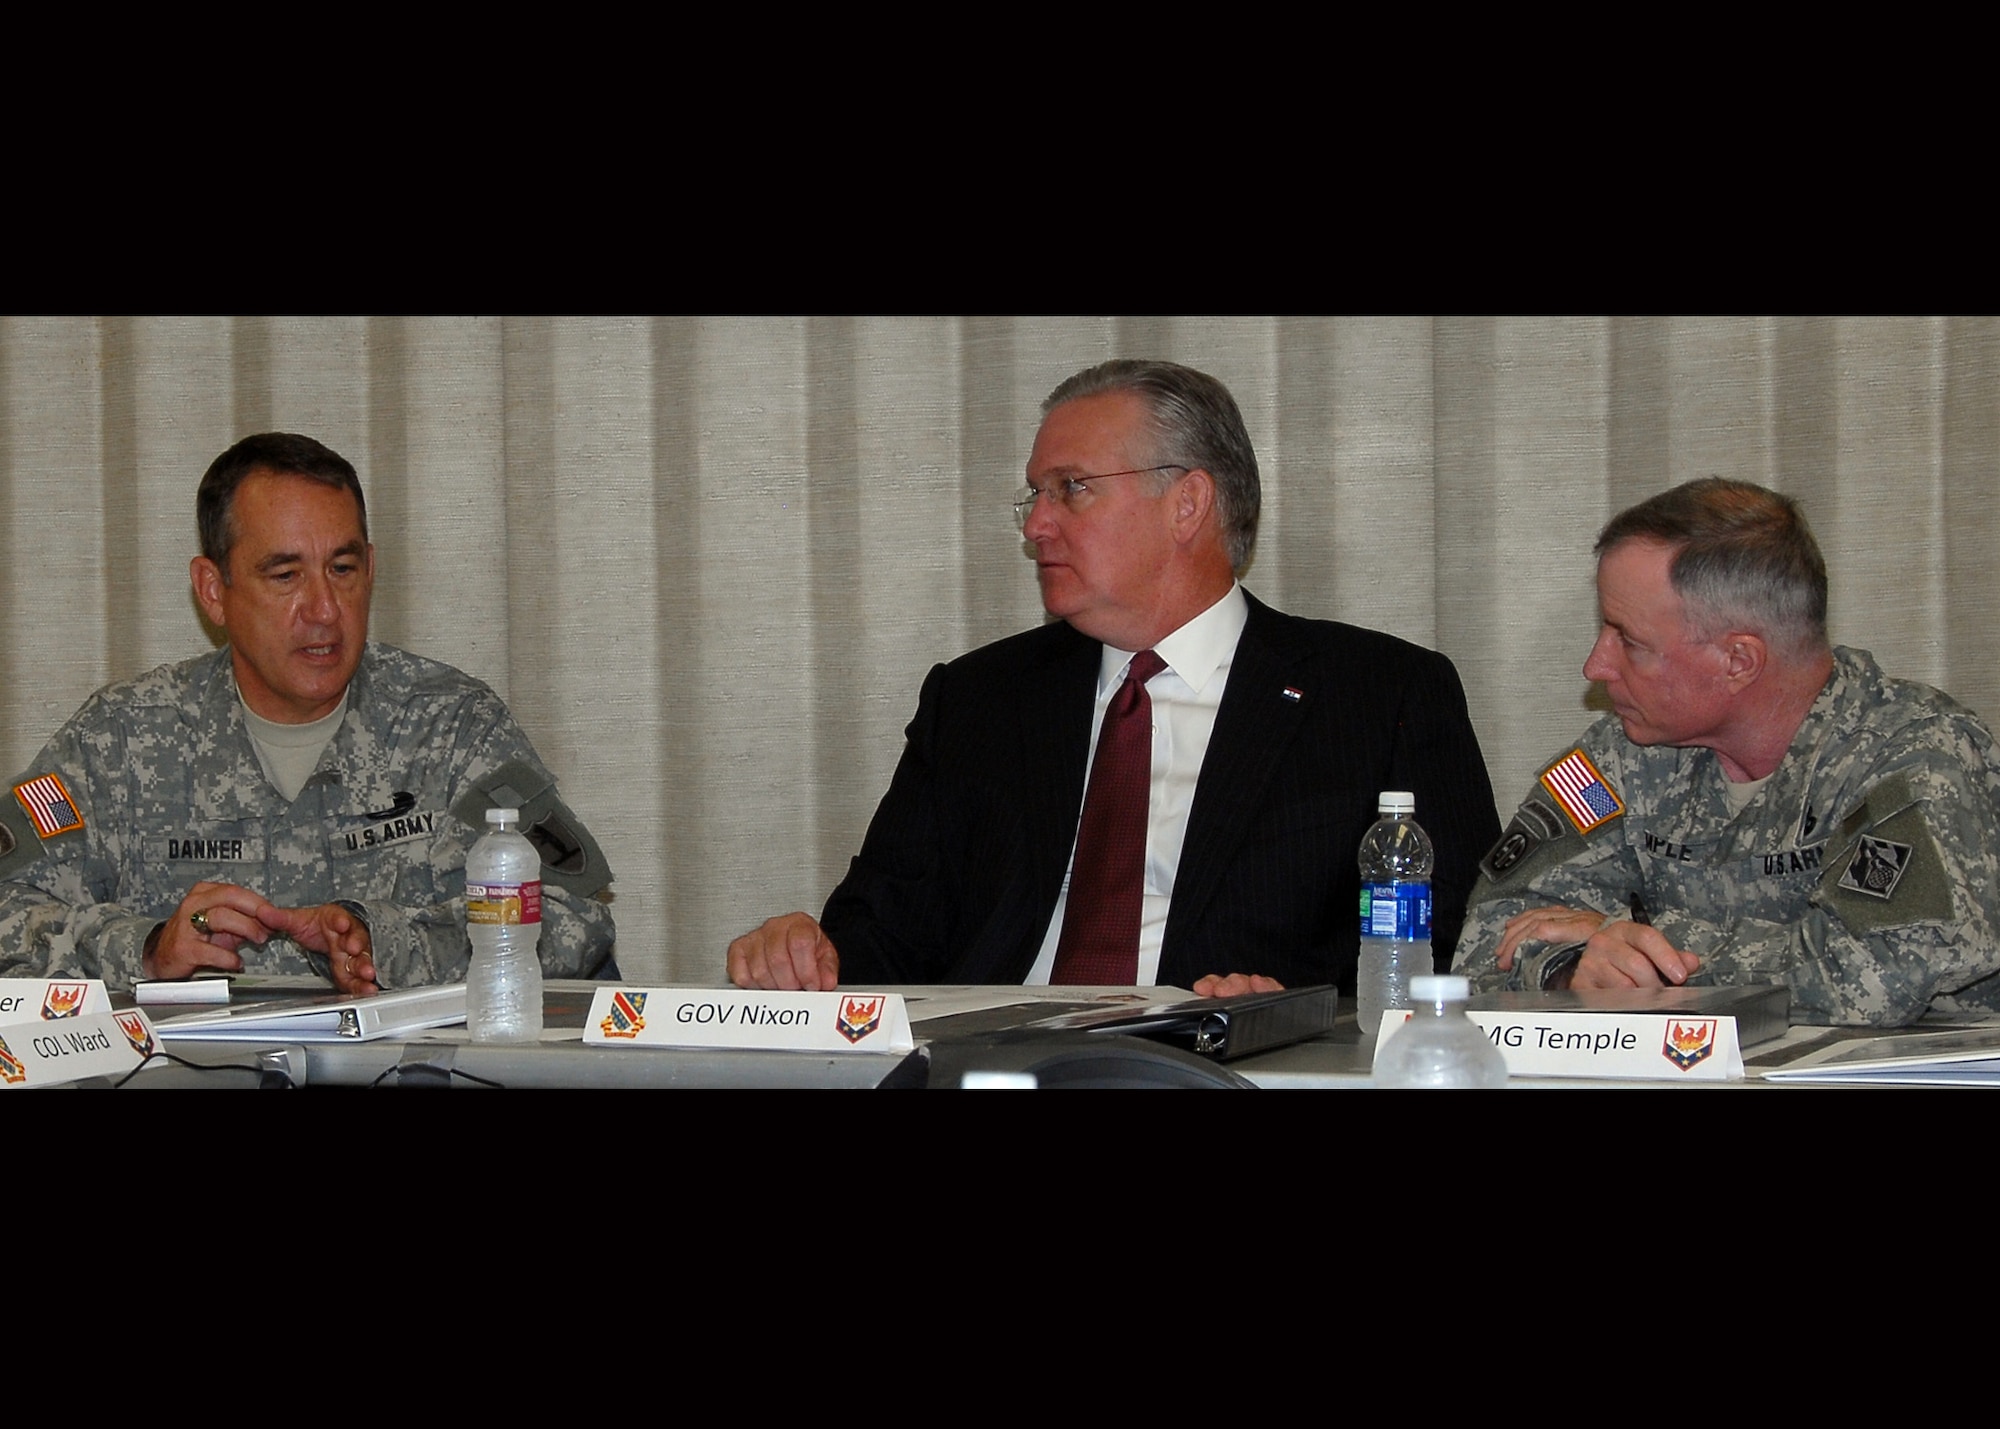 Missouri Governor Jay Nixon, Maj. Gen. Stephen Danner, Commander, Missouir National Guard, and Maj. Gen. Meredith Temple, Commader, US Army Corps of Engineers, meet in in Joplin, MO to discuss diisaster recovery efforts fiollowing the May 22nd storm that devastated the city.   (Photo by Technical Sgt. Robert Ayres)